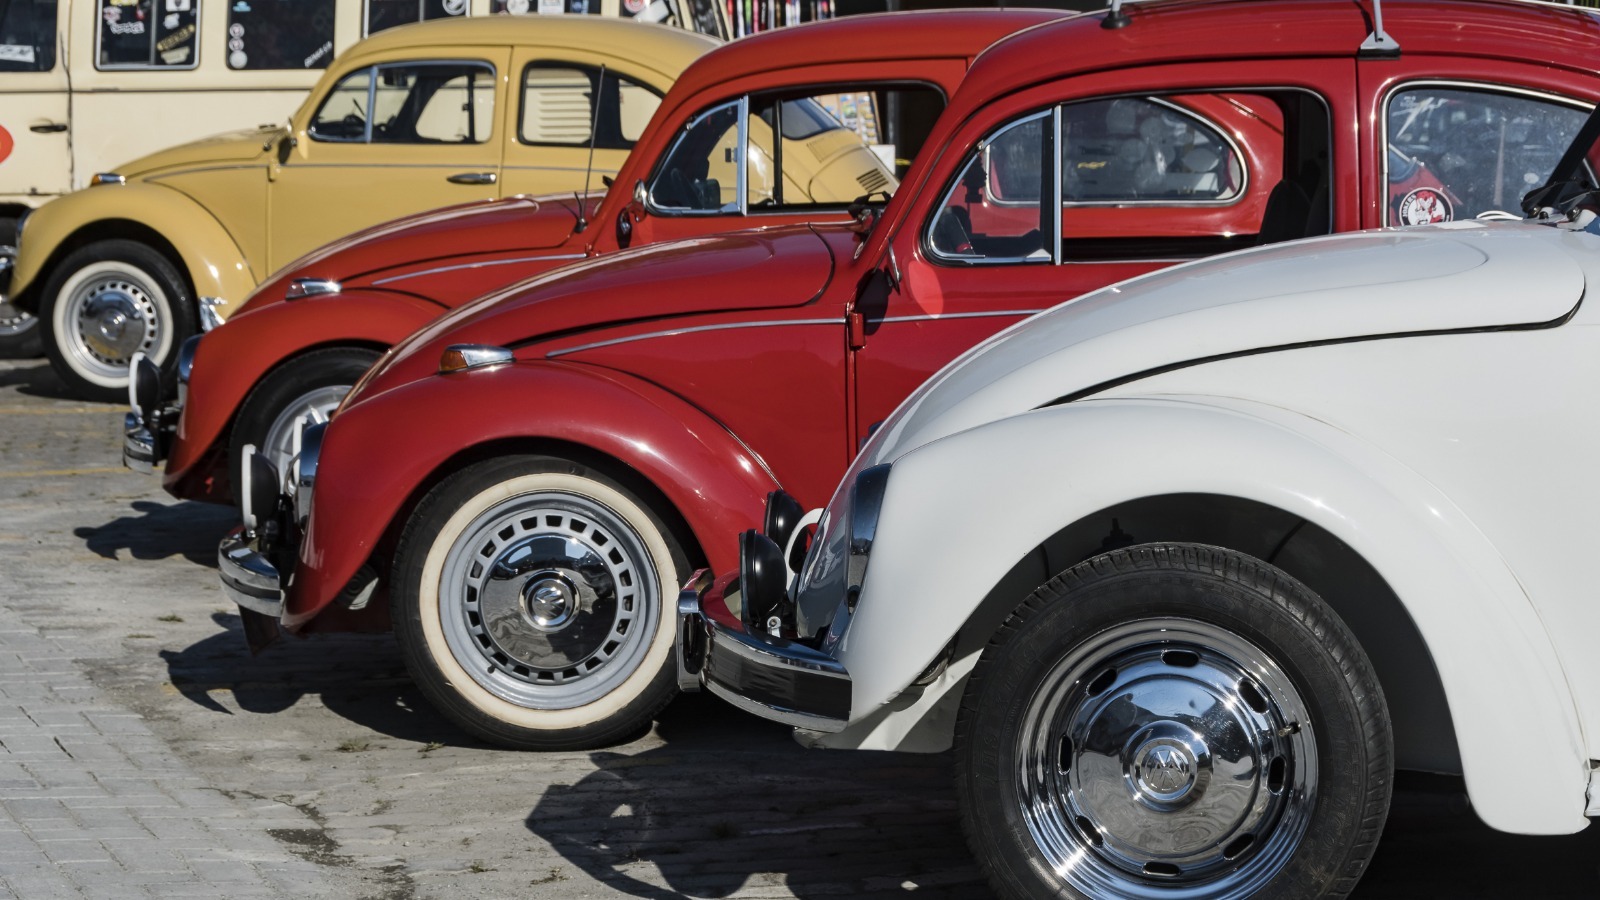 The Most Reliable Engines Ever Built By Volkswagen, Ranked